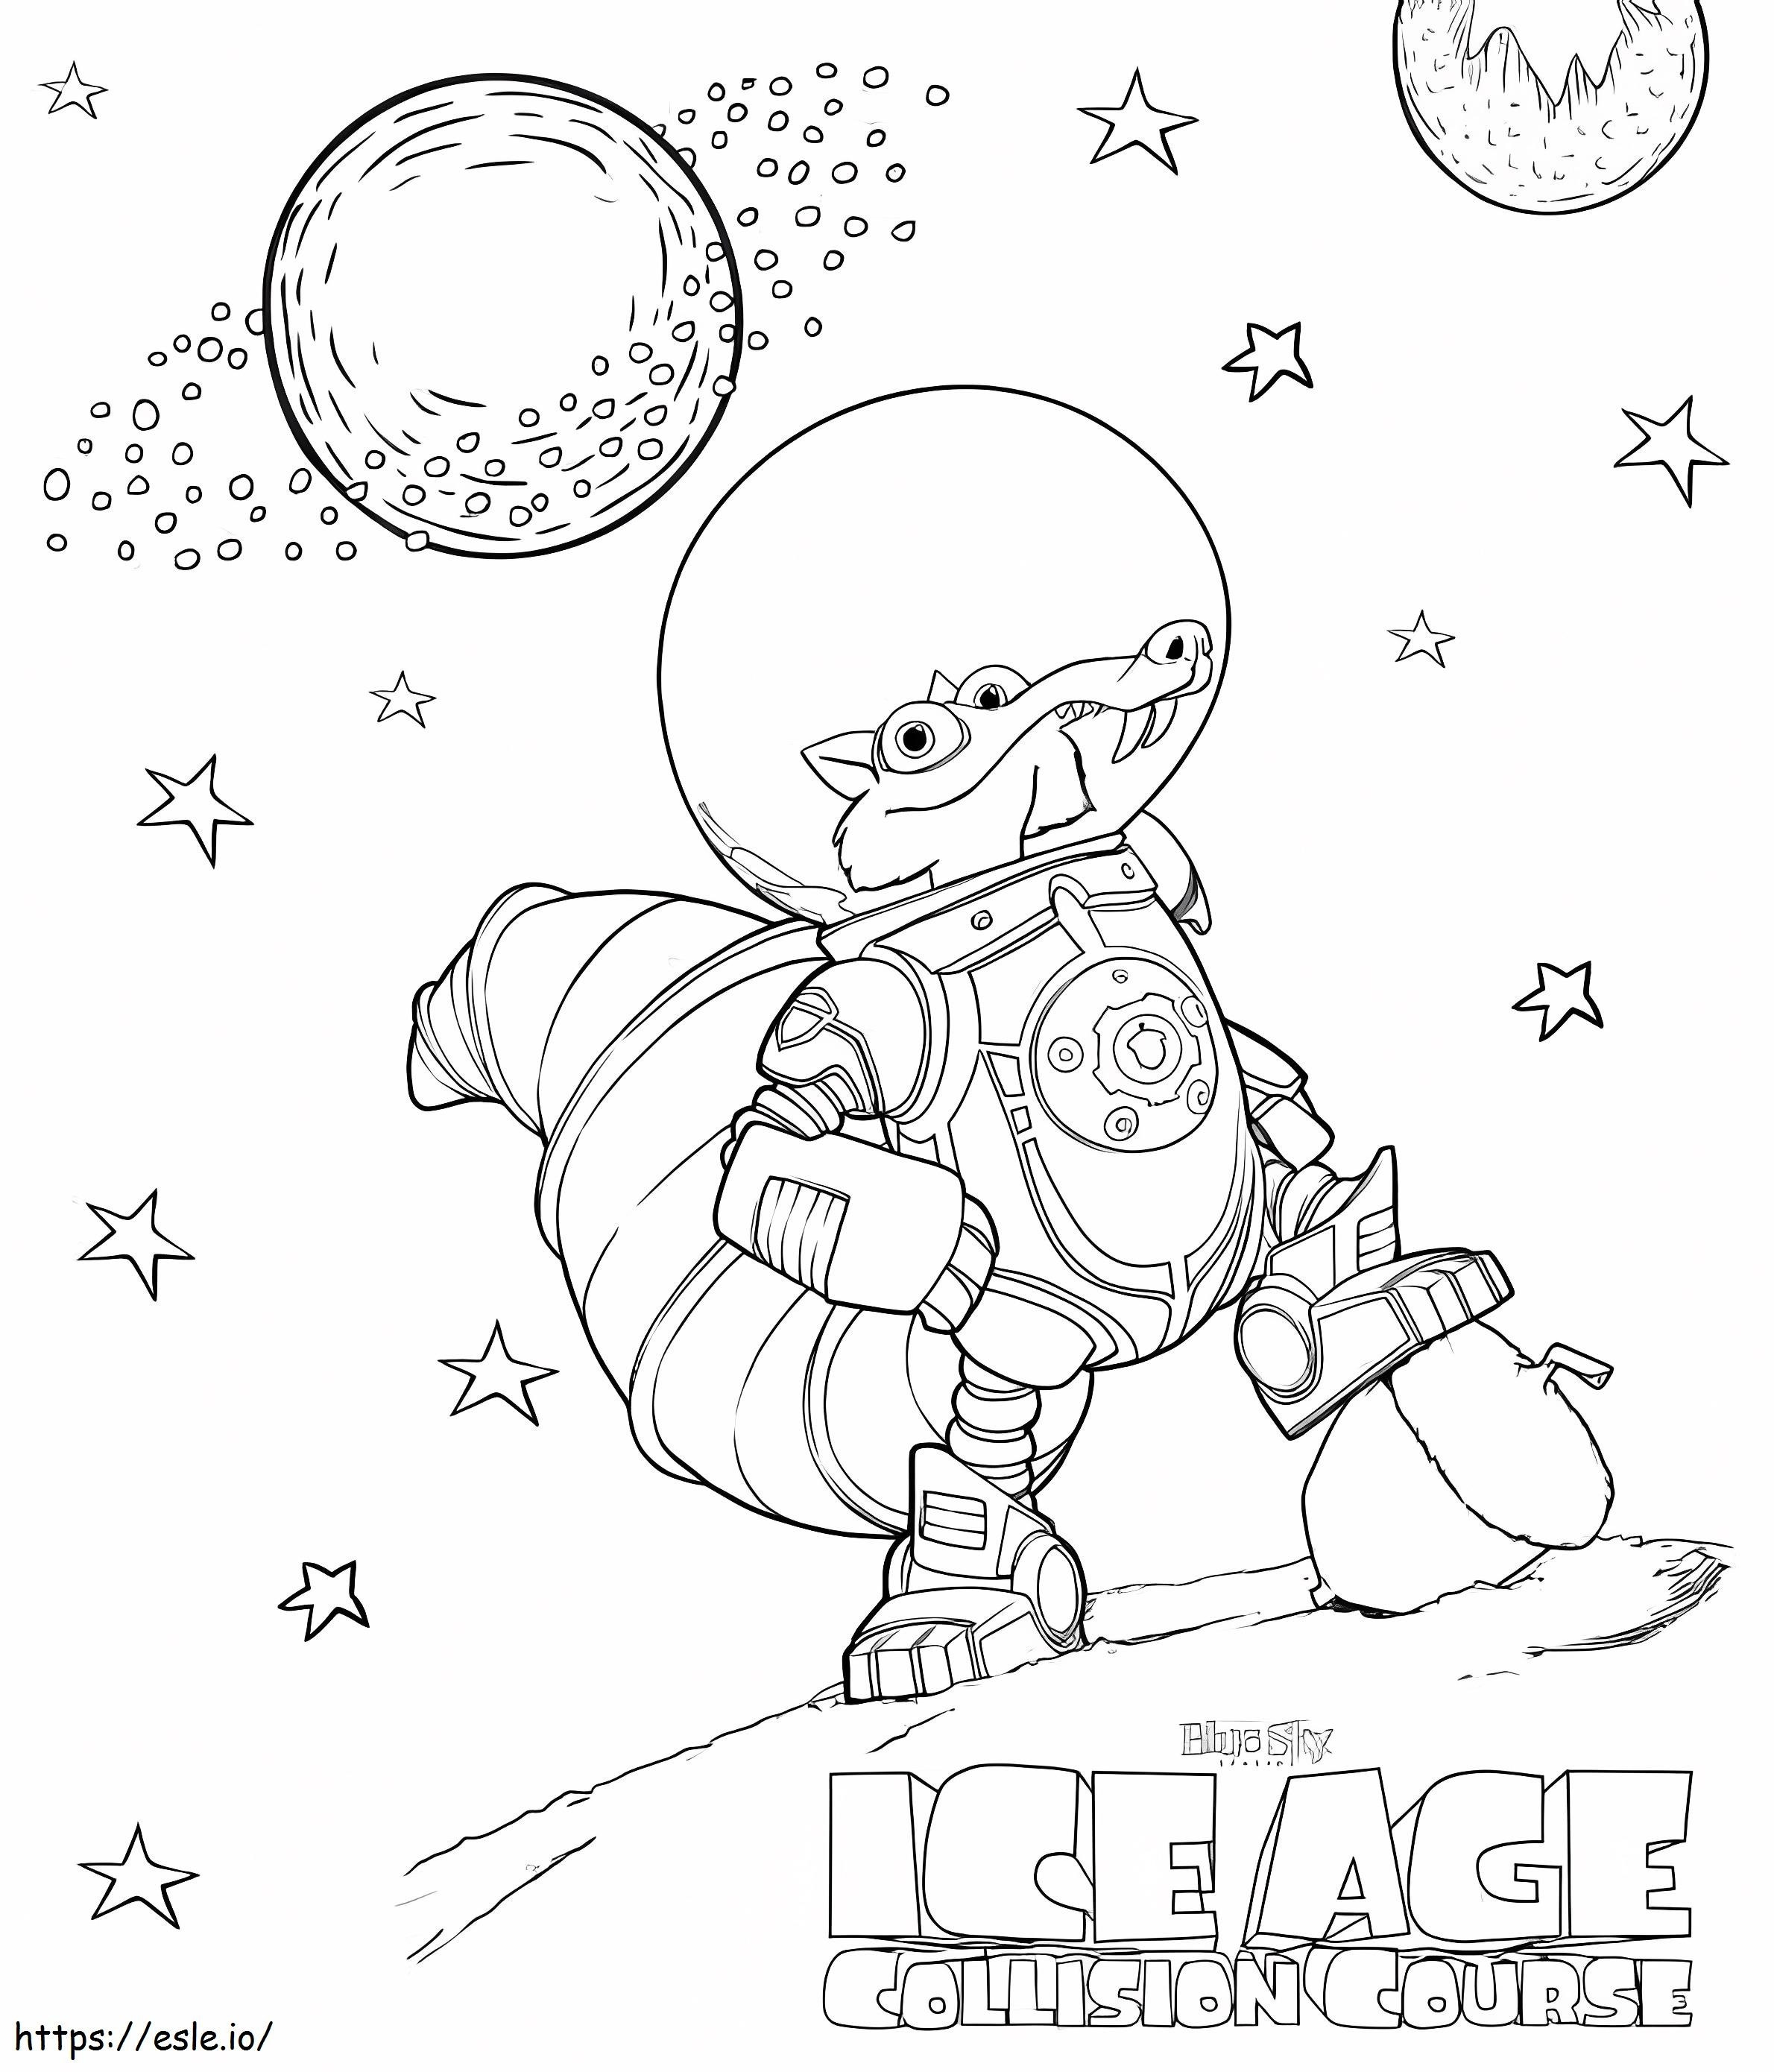 Scrat From Ice Age Collision Course coloring page